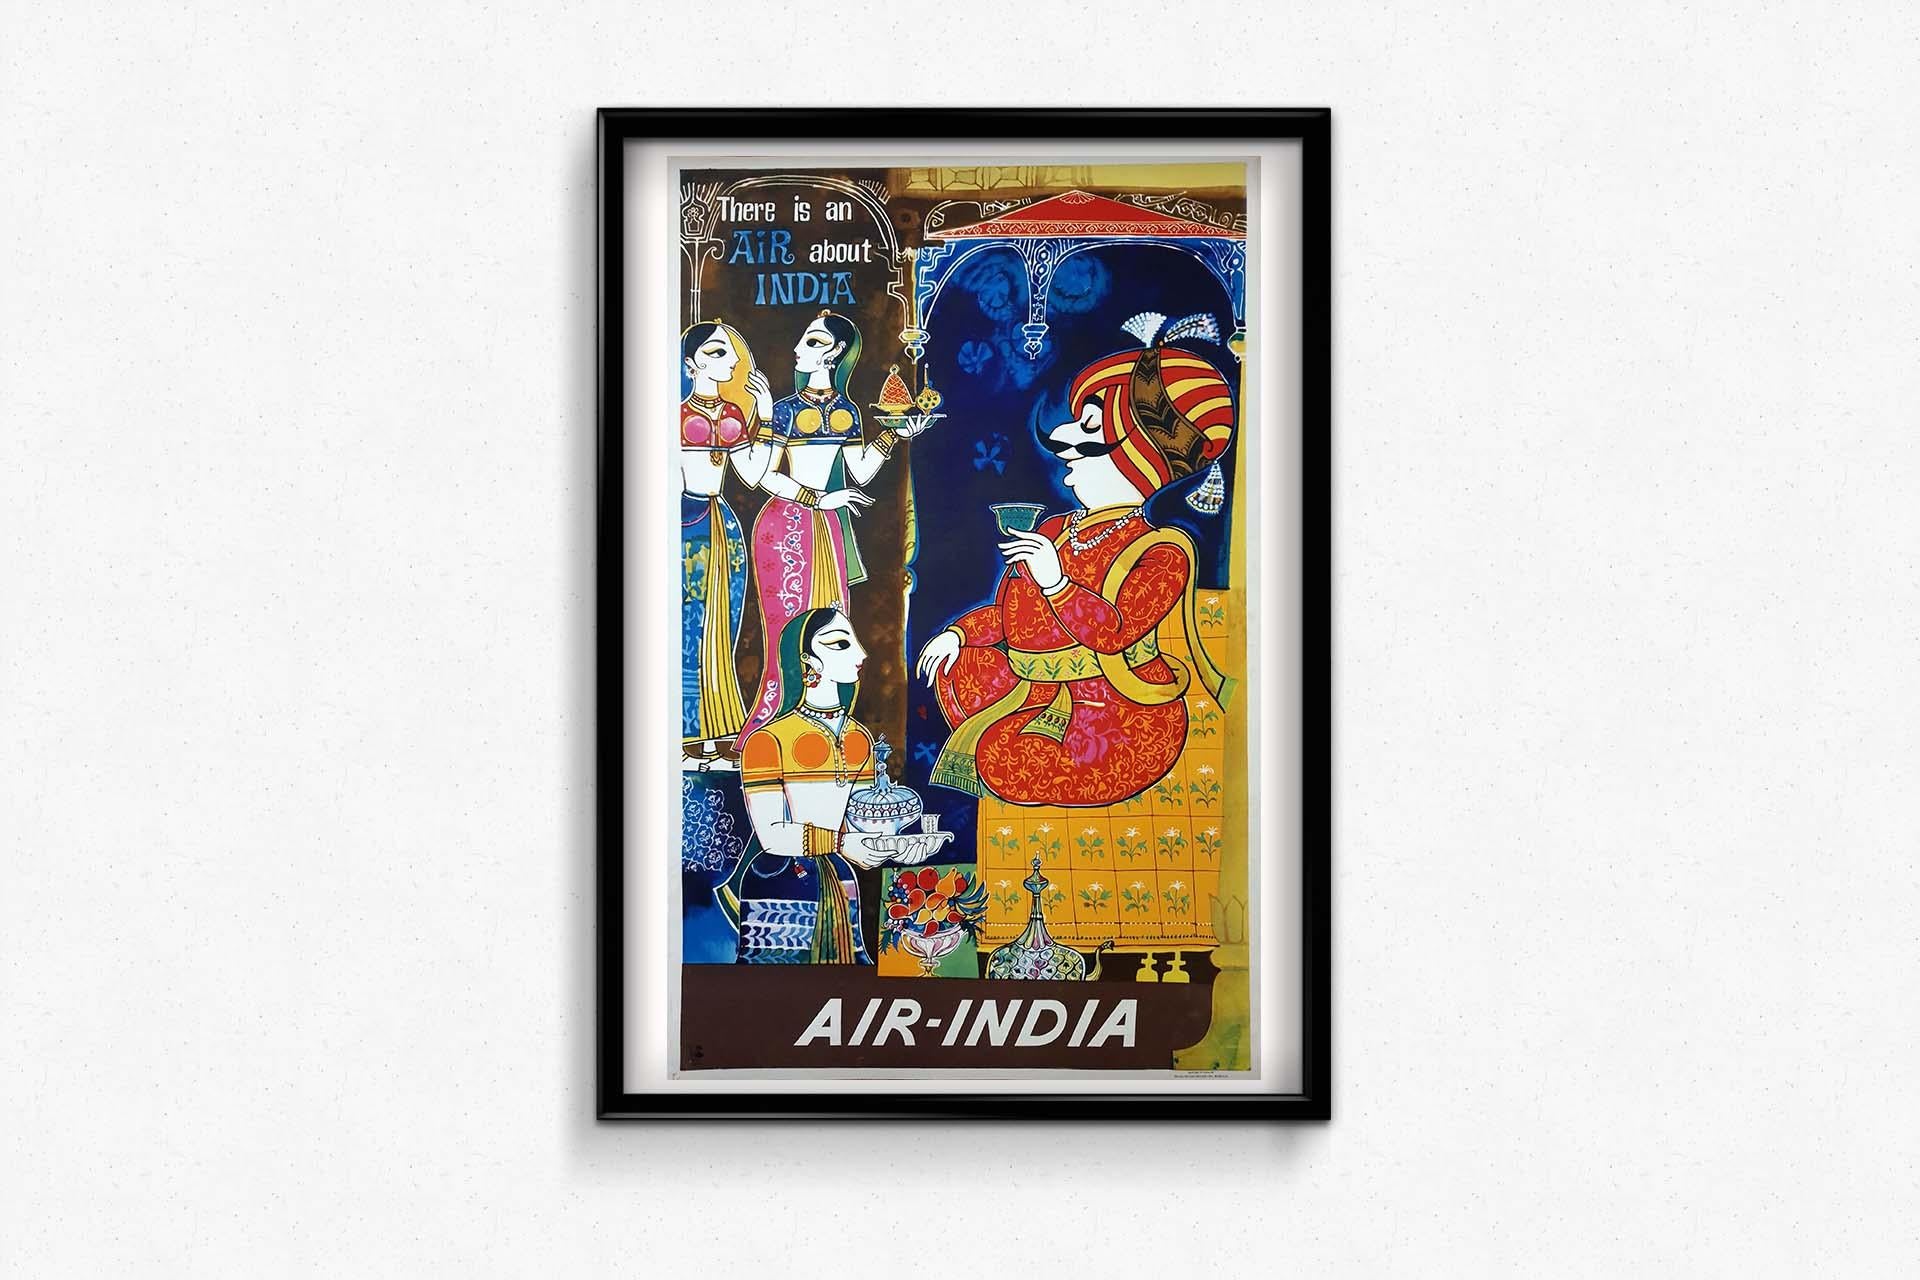 1968 Original Poster - There is an air about India - Airline - Air India 1